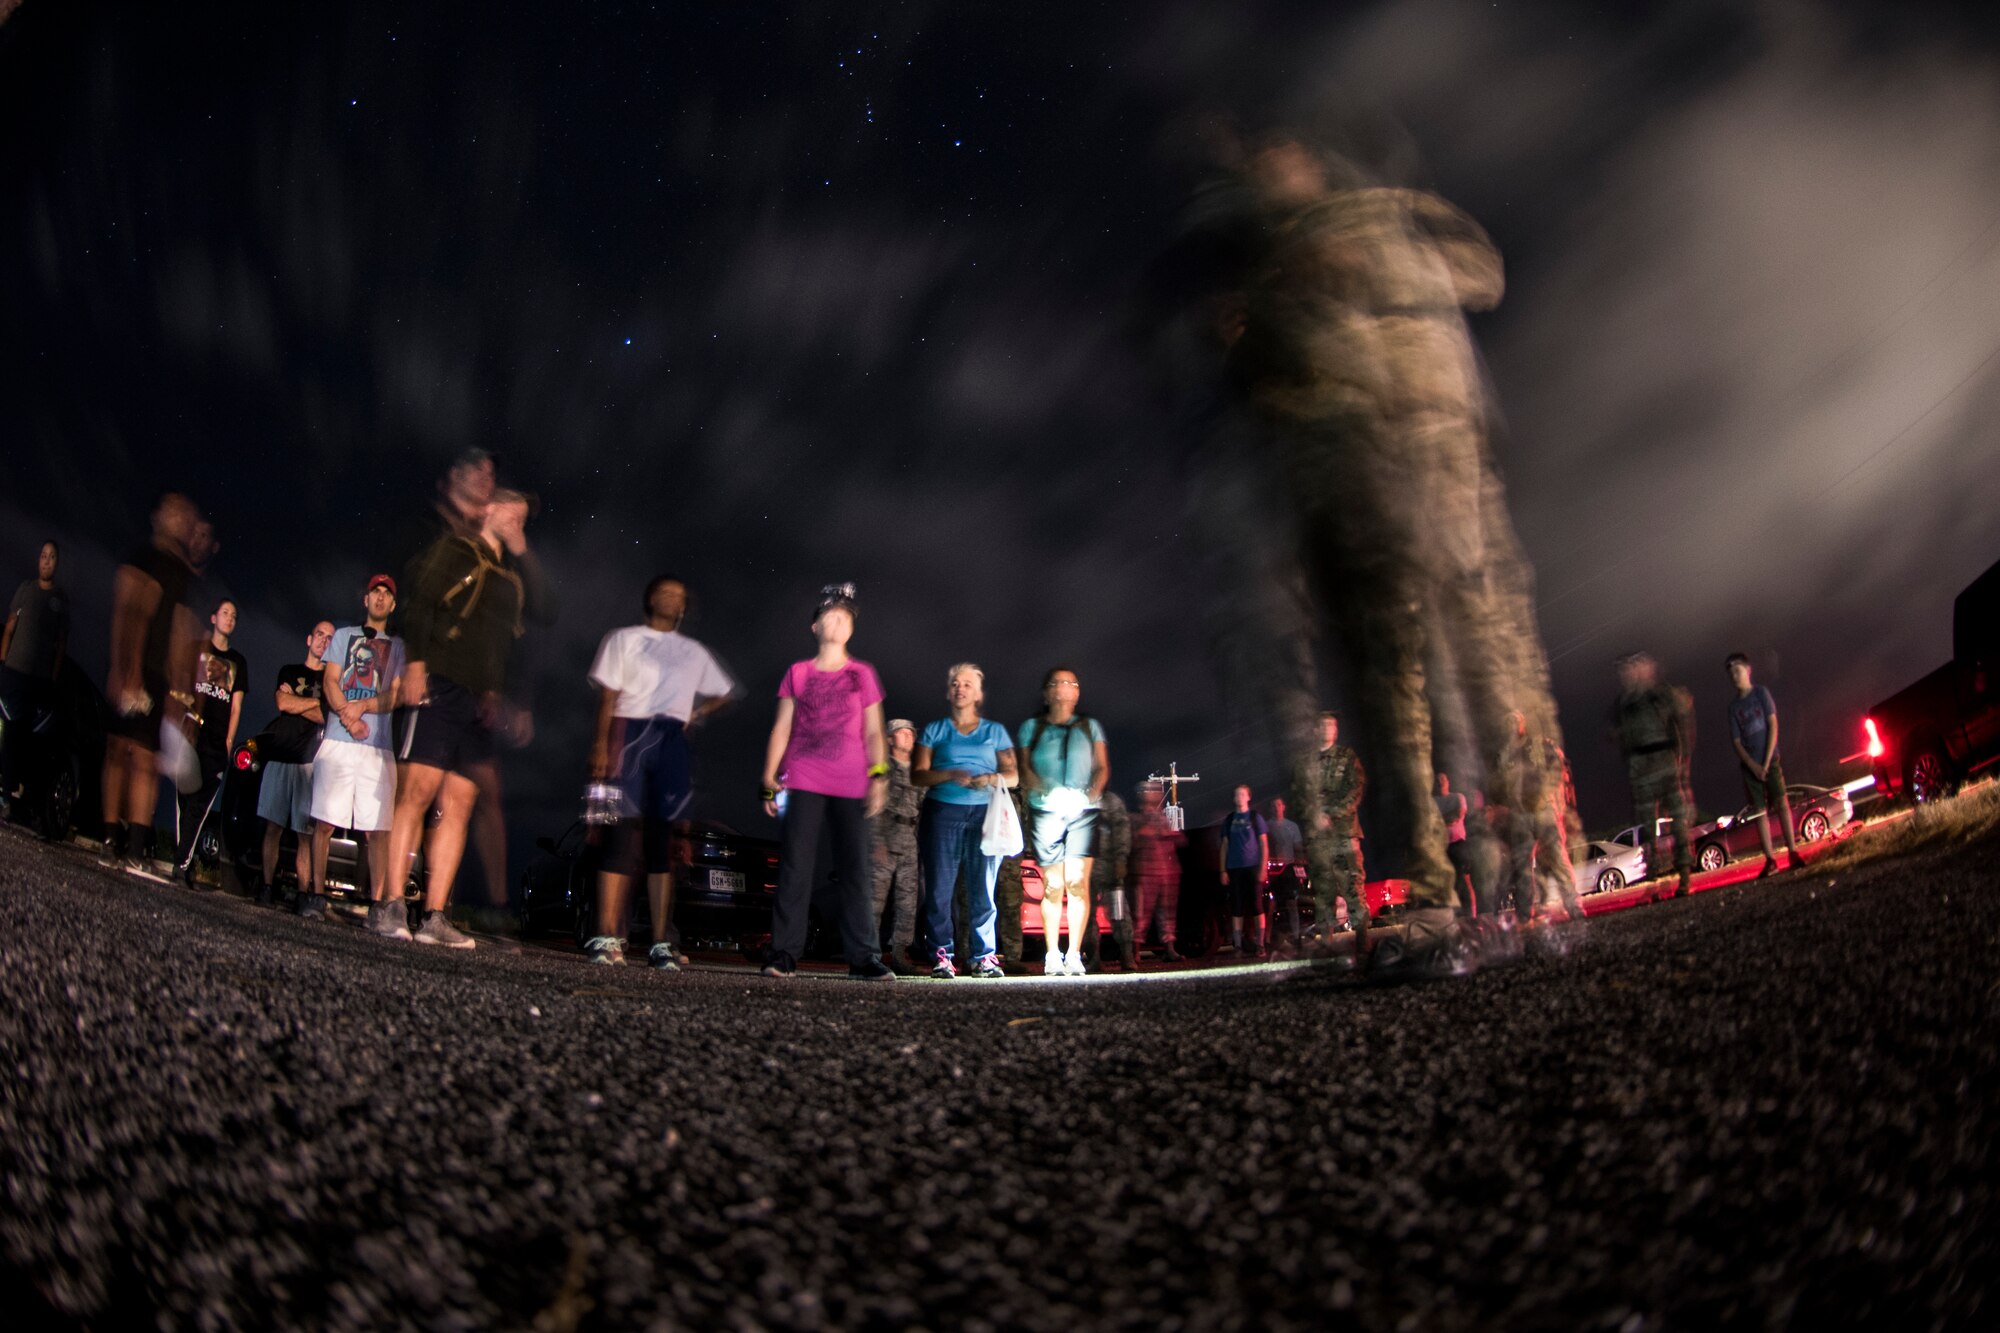 47th Flying Training Wing Command Chief Master Sgt. Robert Zackery III talks to a crowd of Airmen before beginning the 5-kilometer “Walk with the Chief” ruck at Laughlin Air Force Base, Texas, Sept. 30, 2019. Approximately 30 members of Team XL came out in the early hours on Monday morning to increase their deployment readiness and have an opportunity to connect with Zackery in an informal setting. (U.S. Air Force photo by Senior Airman Marco A. Gomez)